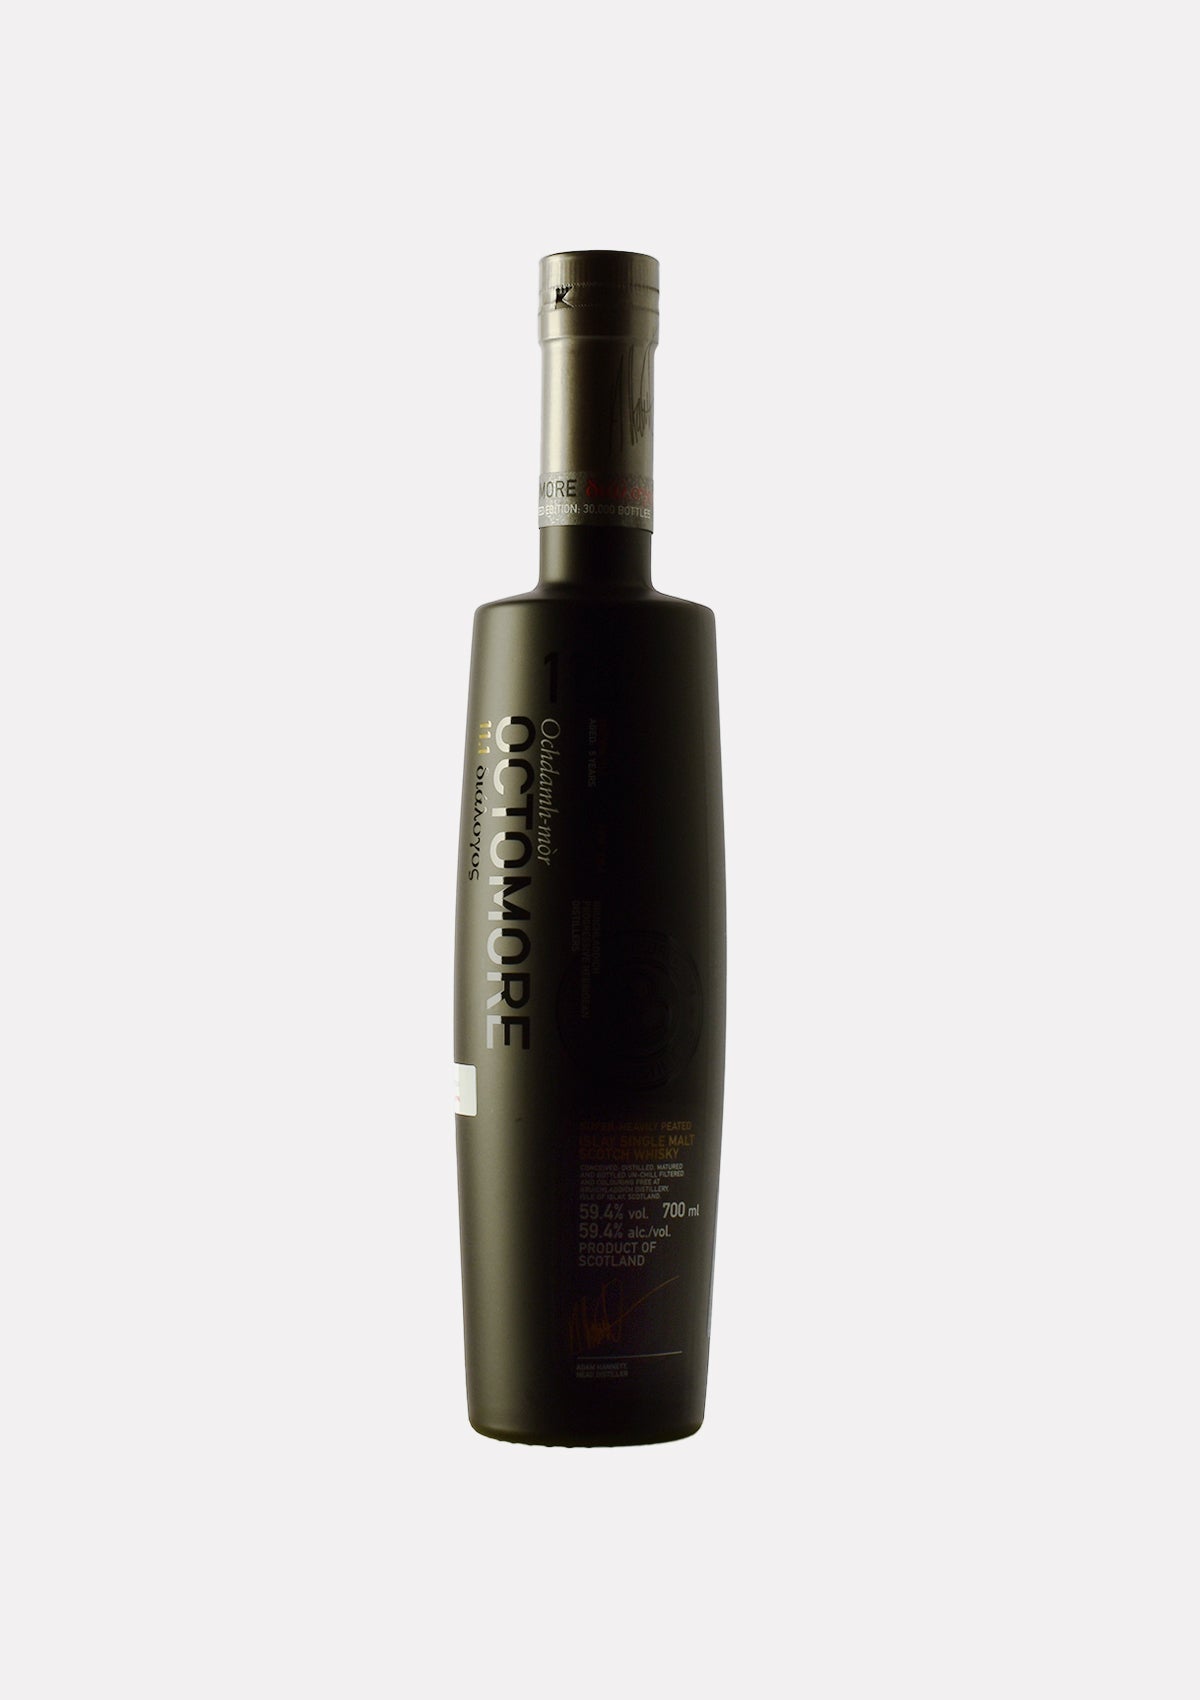 Octomore 11.1 139.6 ppm